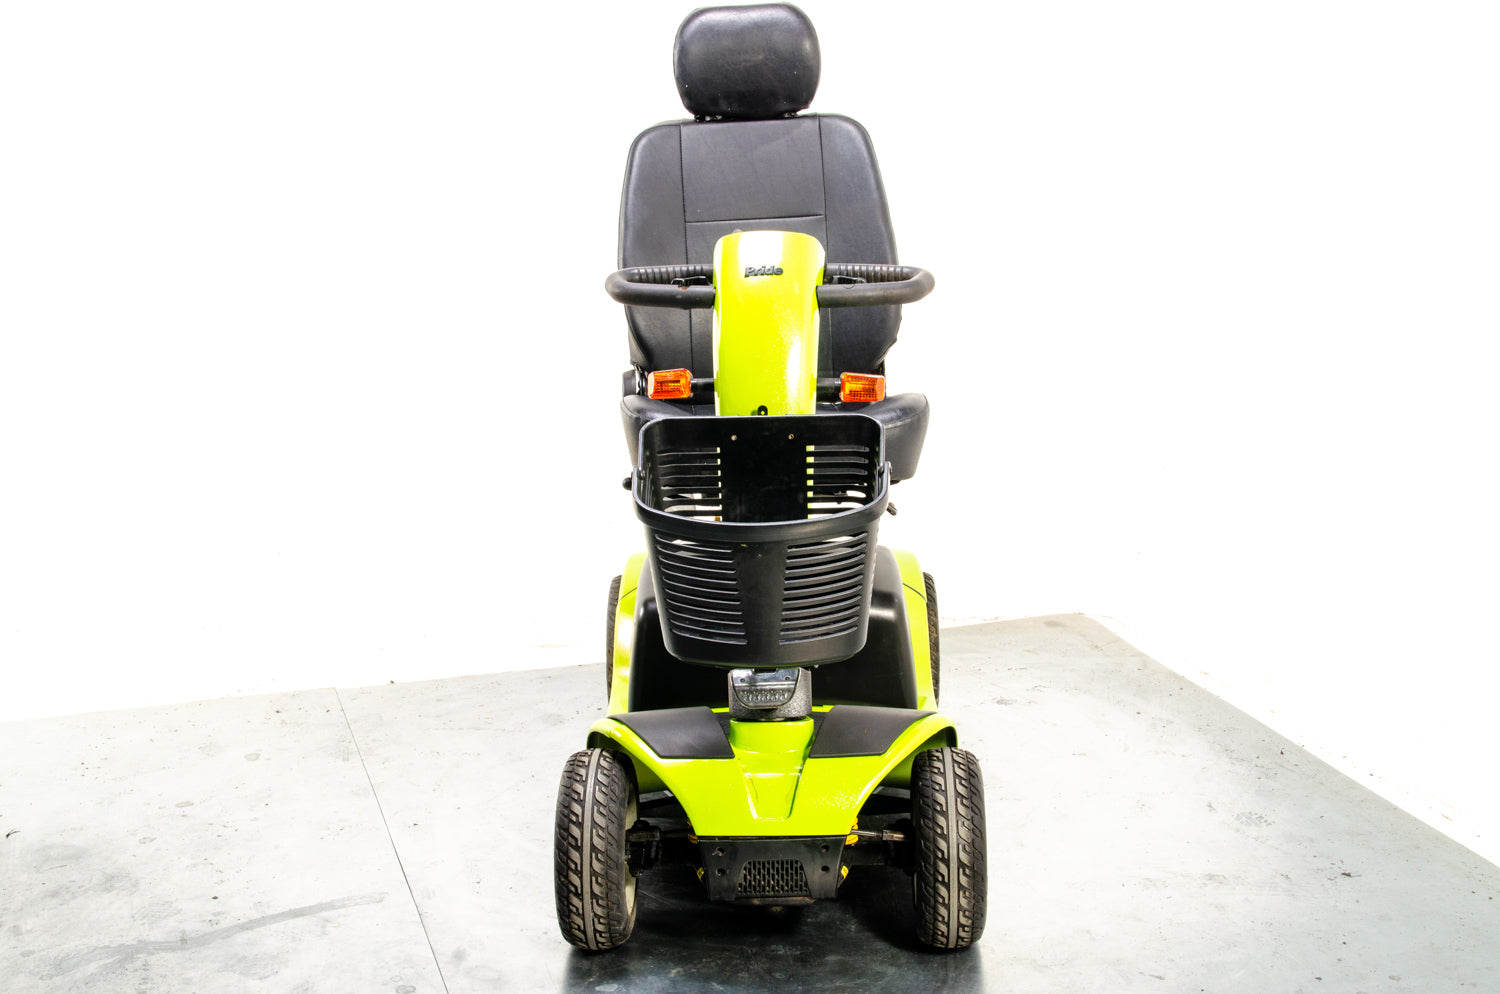 Pride Colt Deluxe Used Electric Mobility Scooter 6mph Transportable Road Pavement Seat Post Suspension Solid Tyres Lime Green 13443